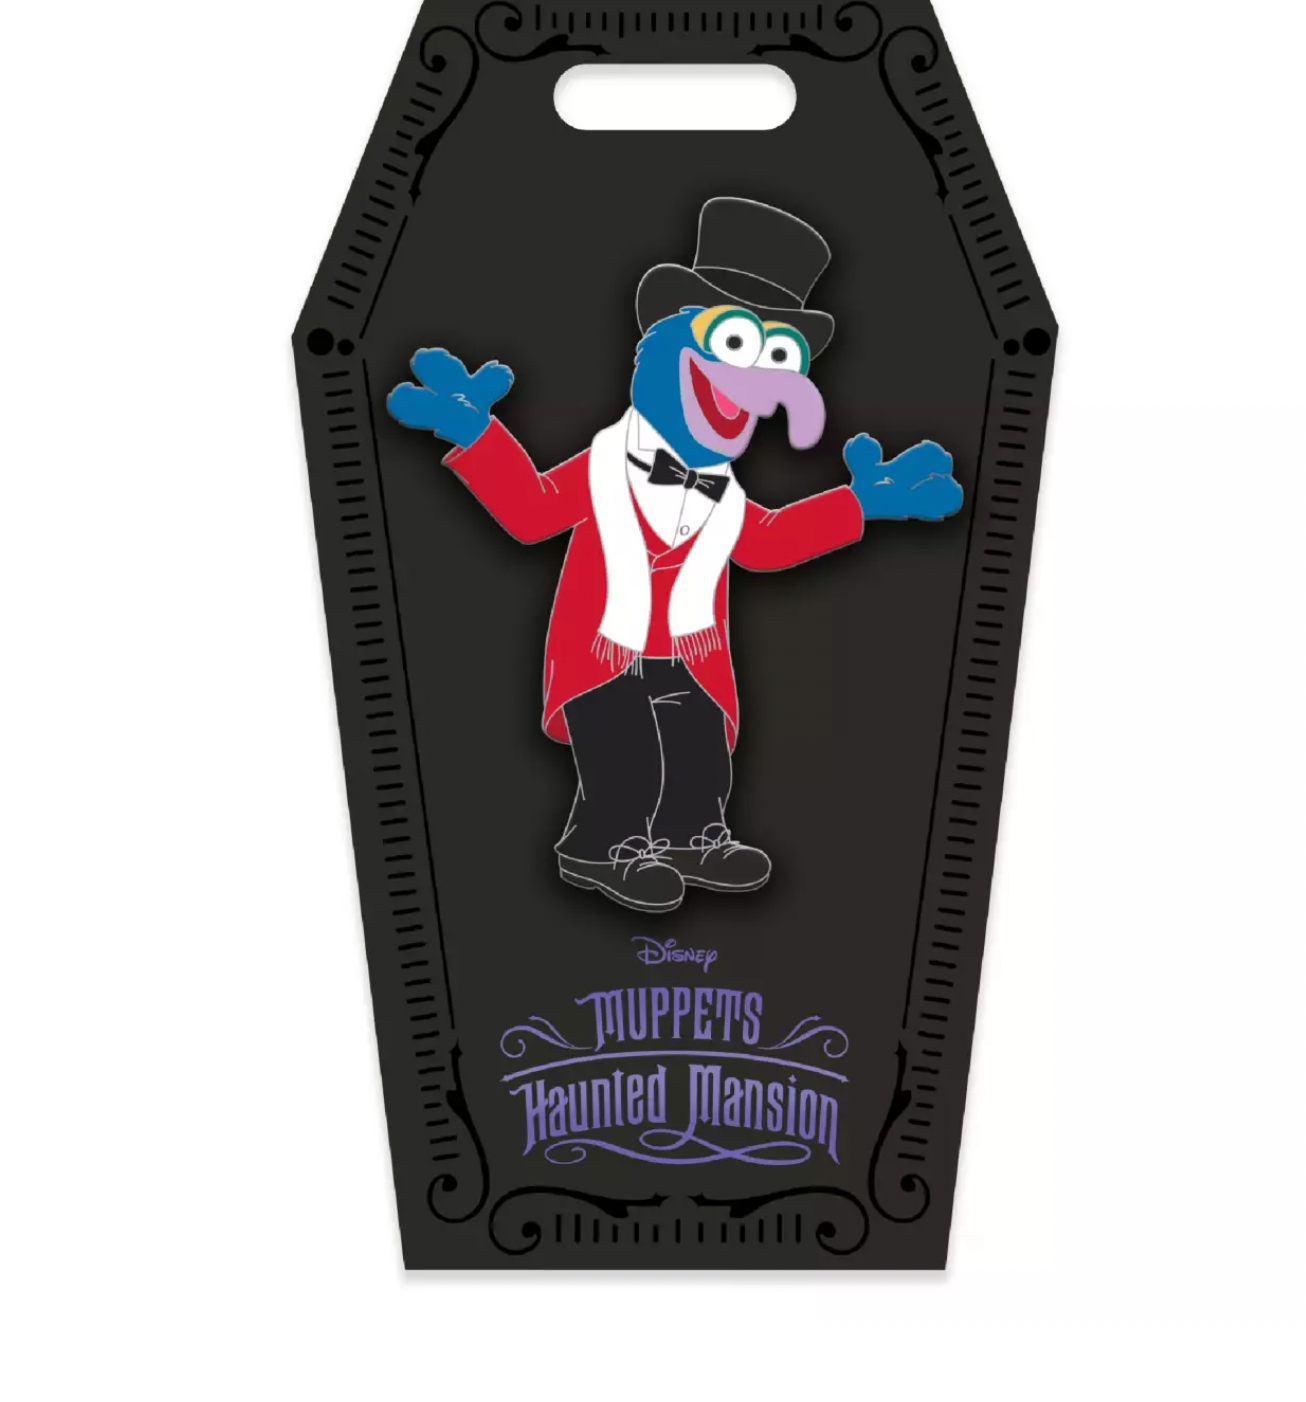 Disney D23 Muppets Haunted MansionTuxedo Gonzo Limited Pin New with Card